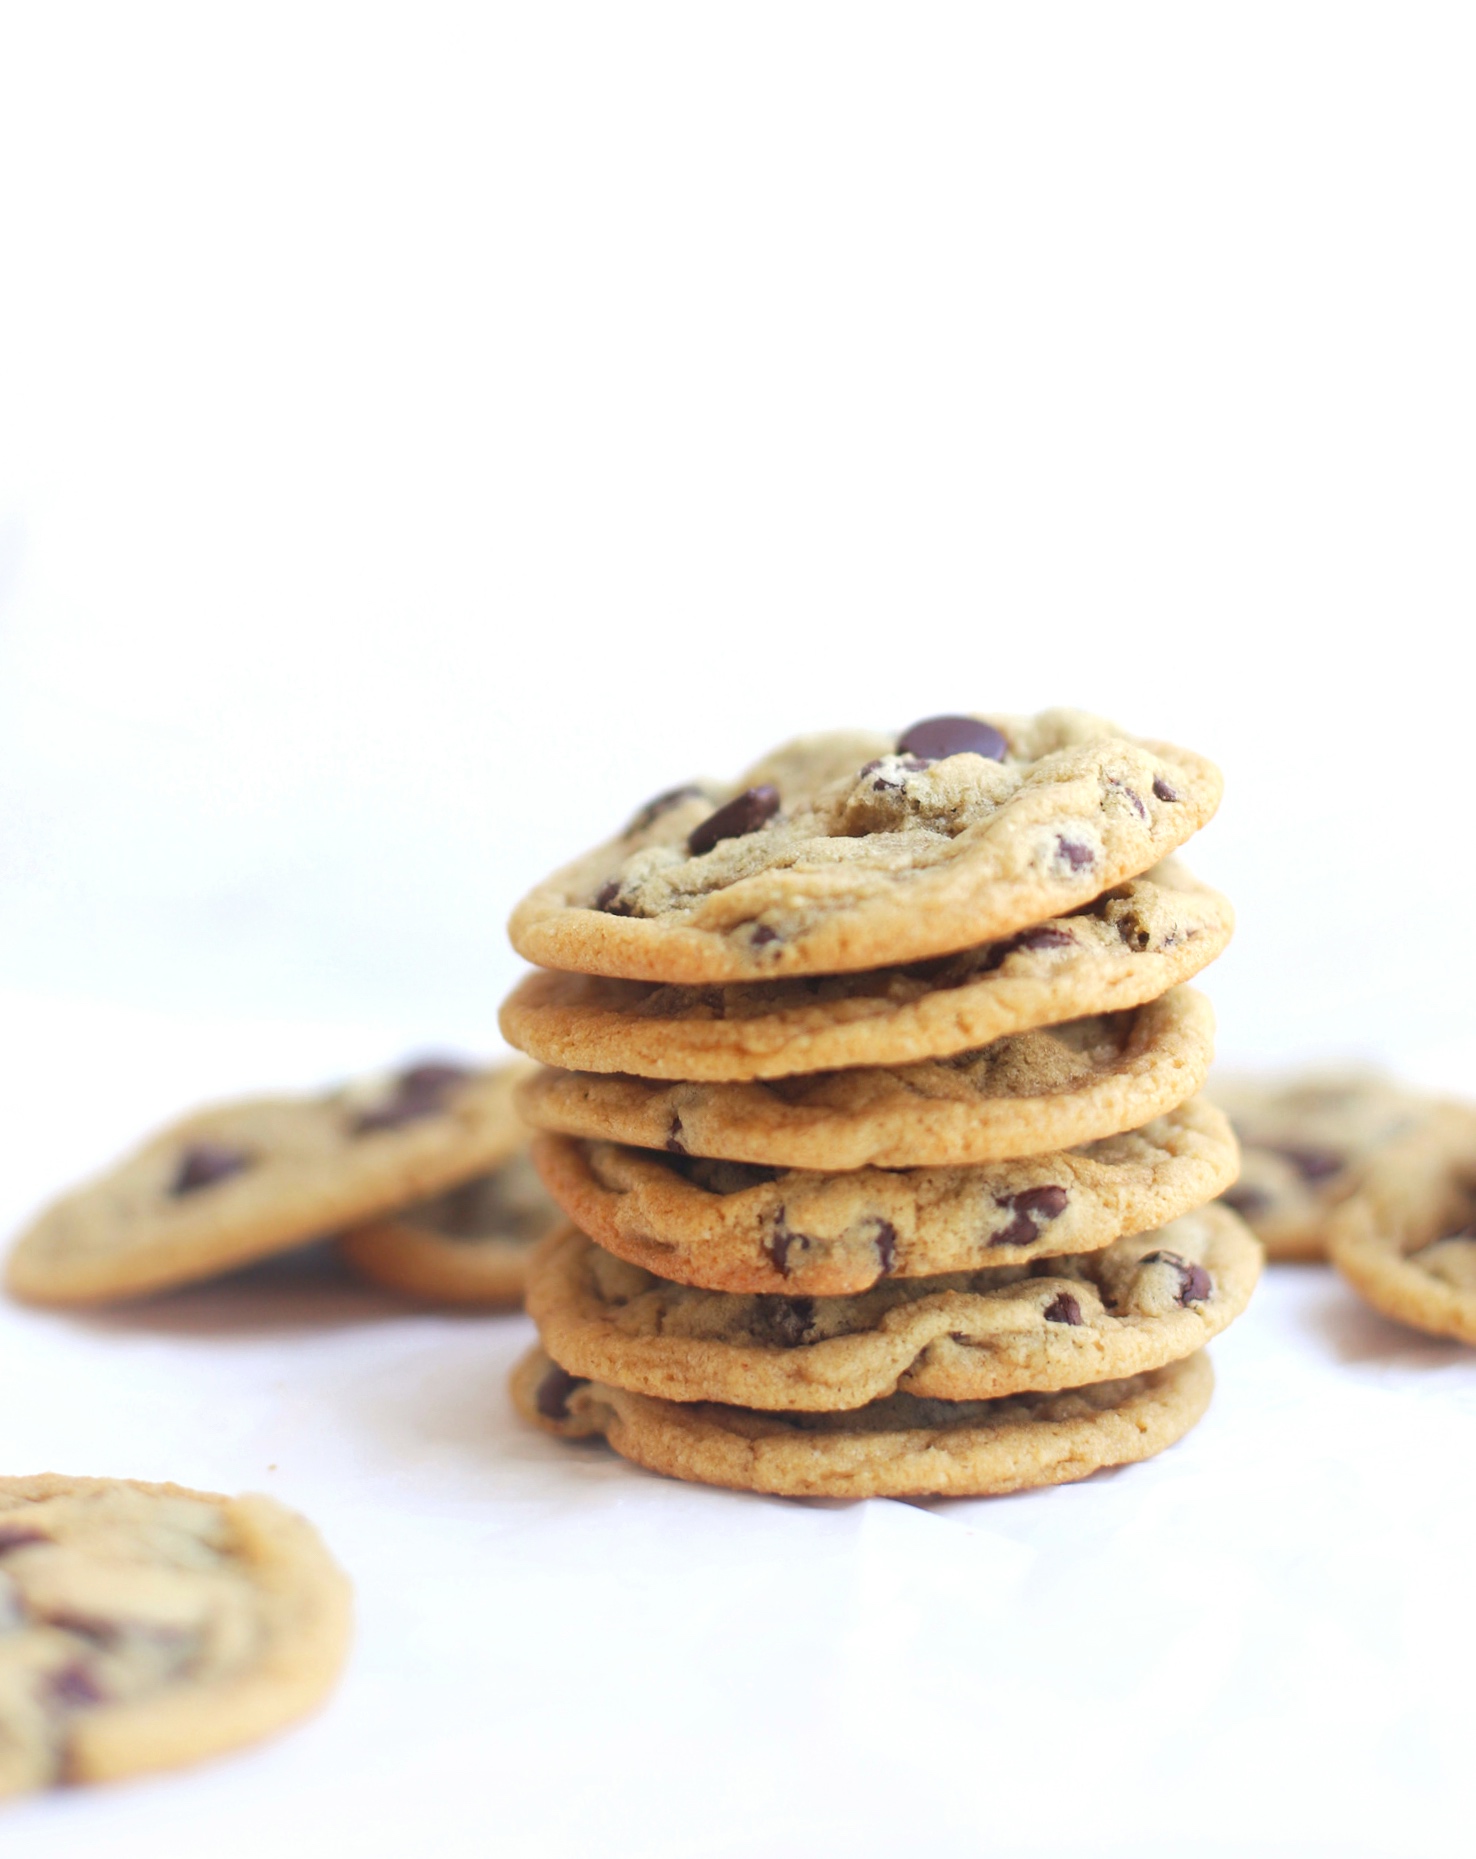 These are the very best dairy free chocolate chip cookies ever. Made in one bowl, the easy recipe results in ooey gooey, oh-so-soft and chewy perfect chocolate chip cookies every time. Plus, we have a few tricks for making these cookies vegan, and/or gluten-free too! | glitterinc.com | @glitterinc